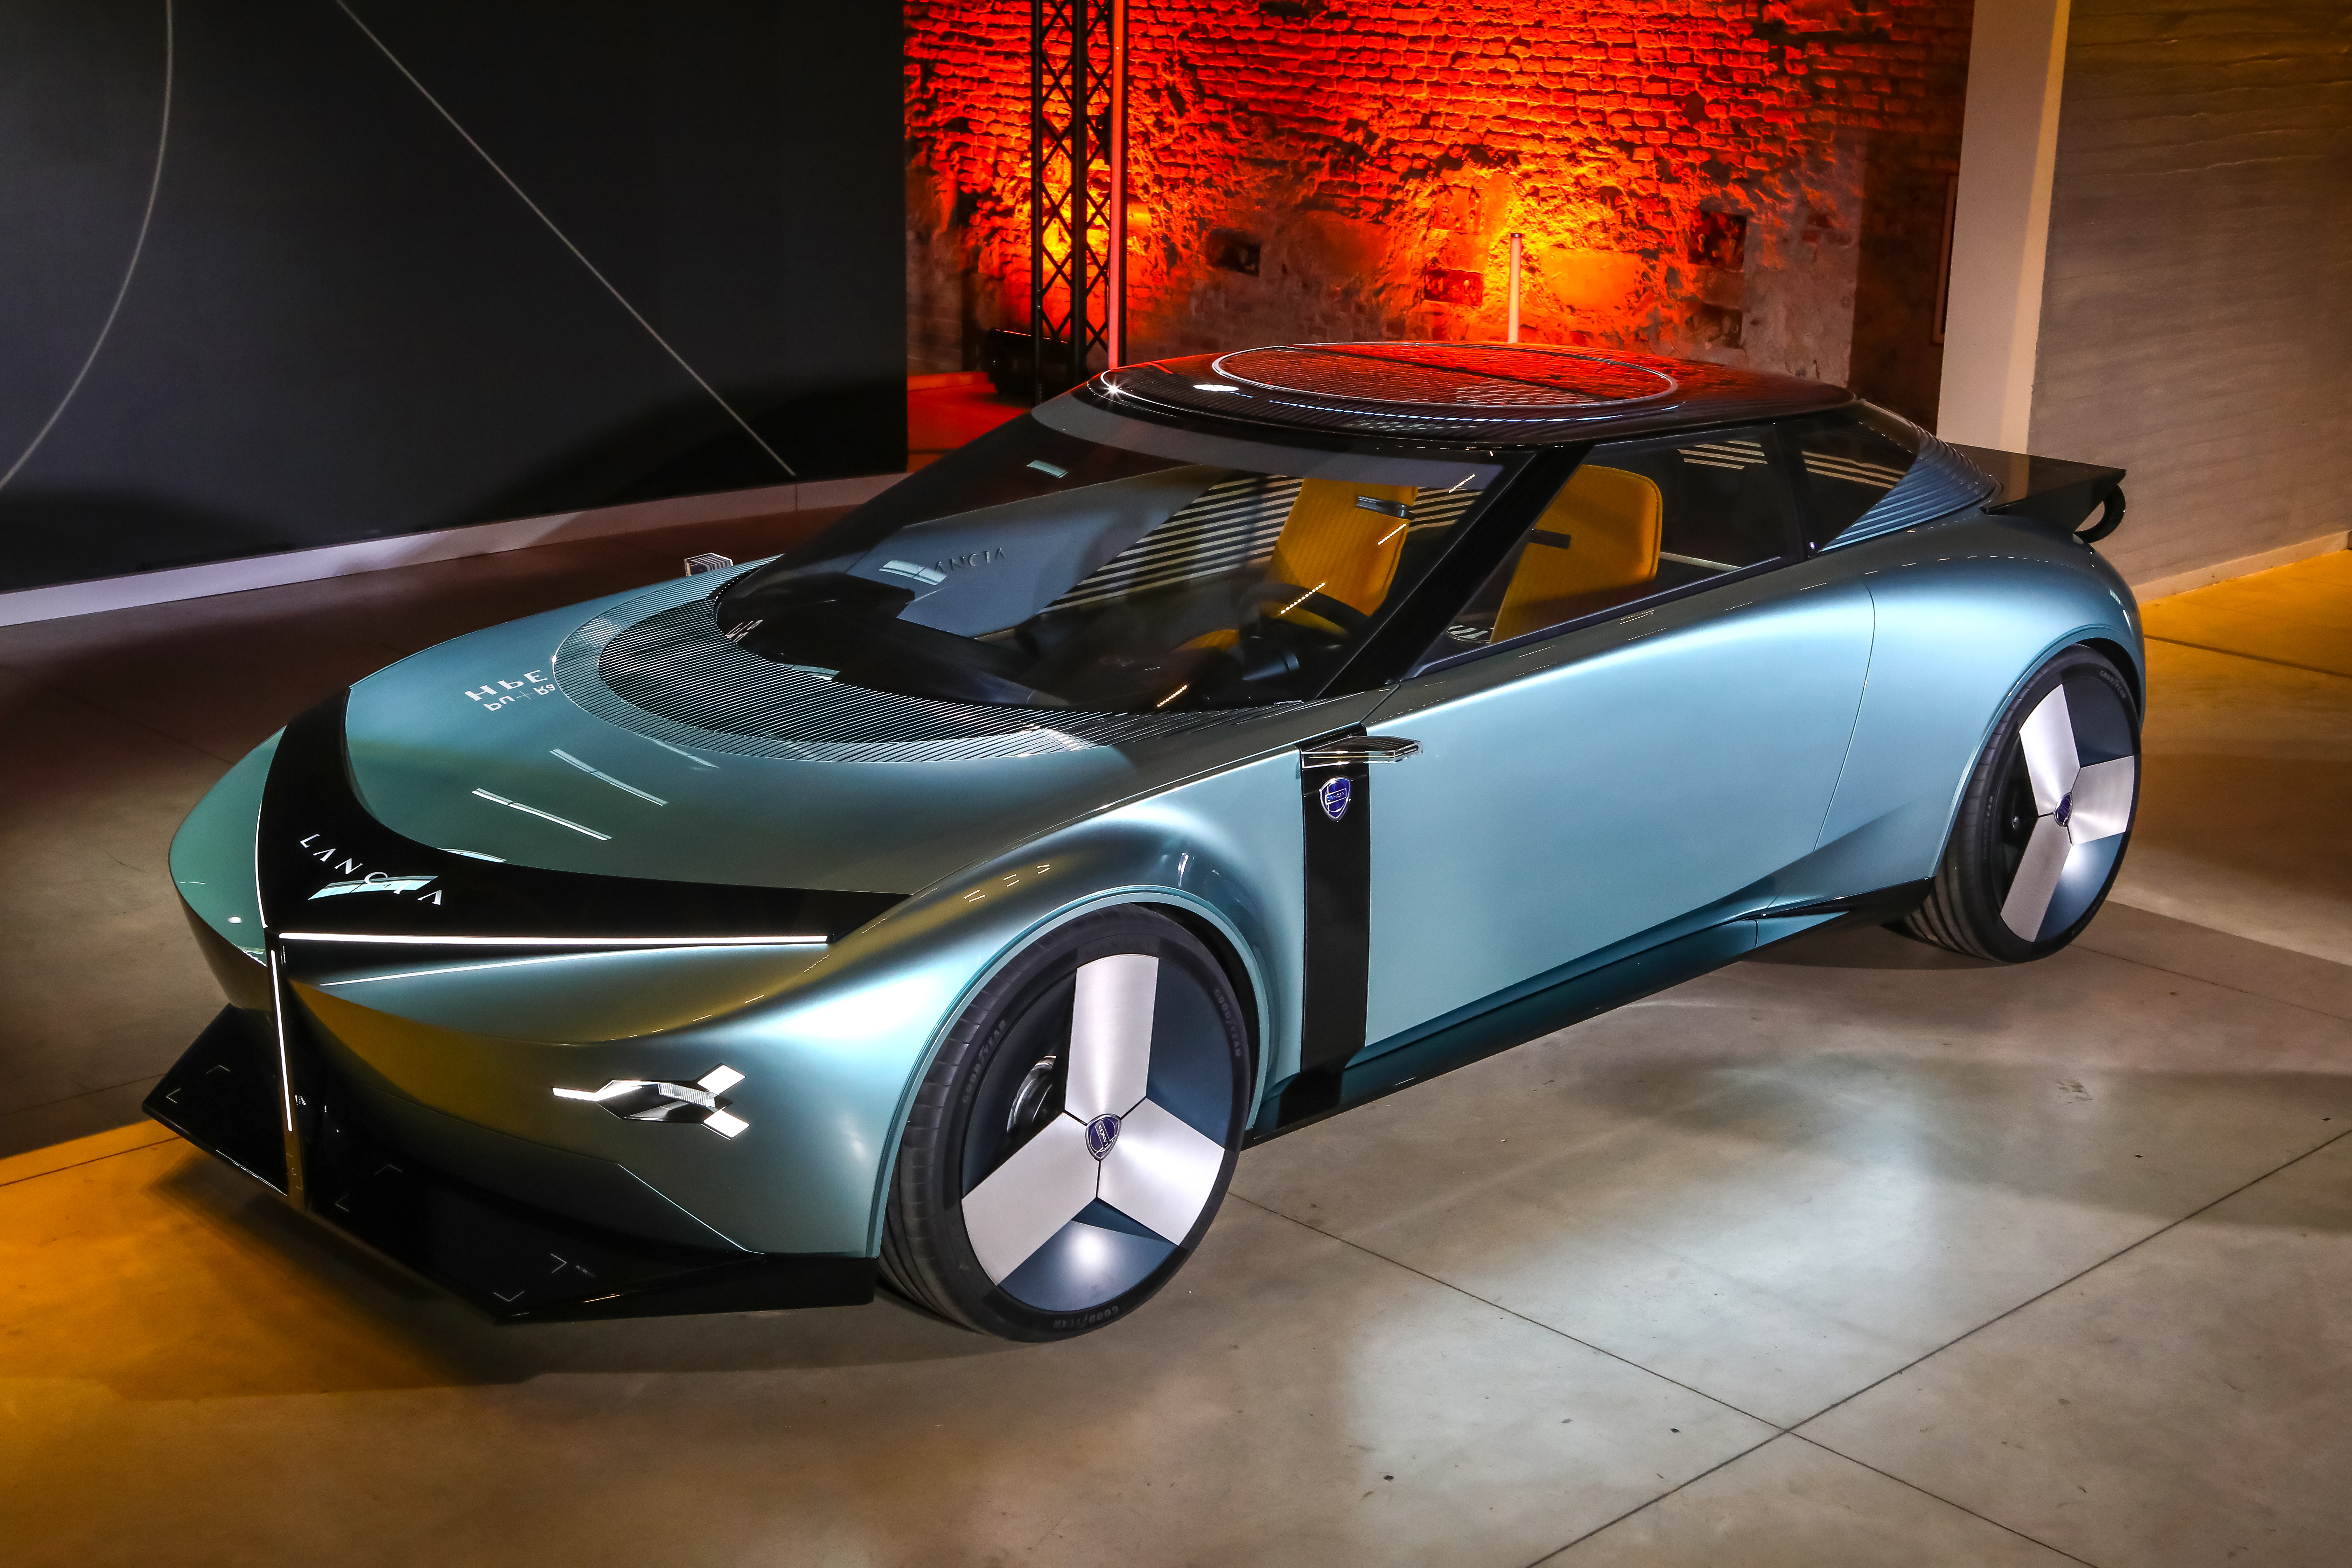 Lancia lifts the curtain on its 100% electric car of the future